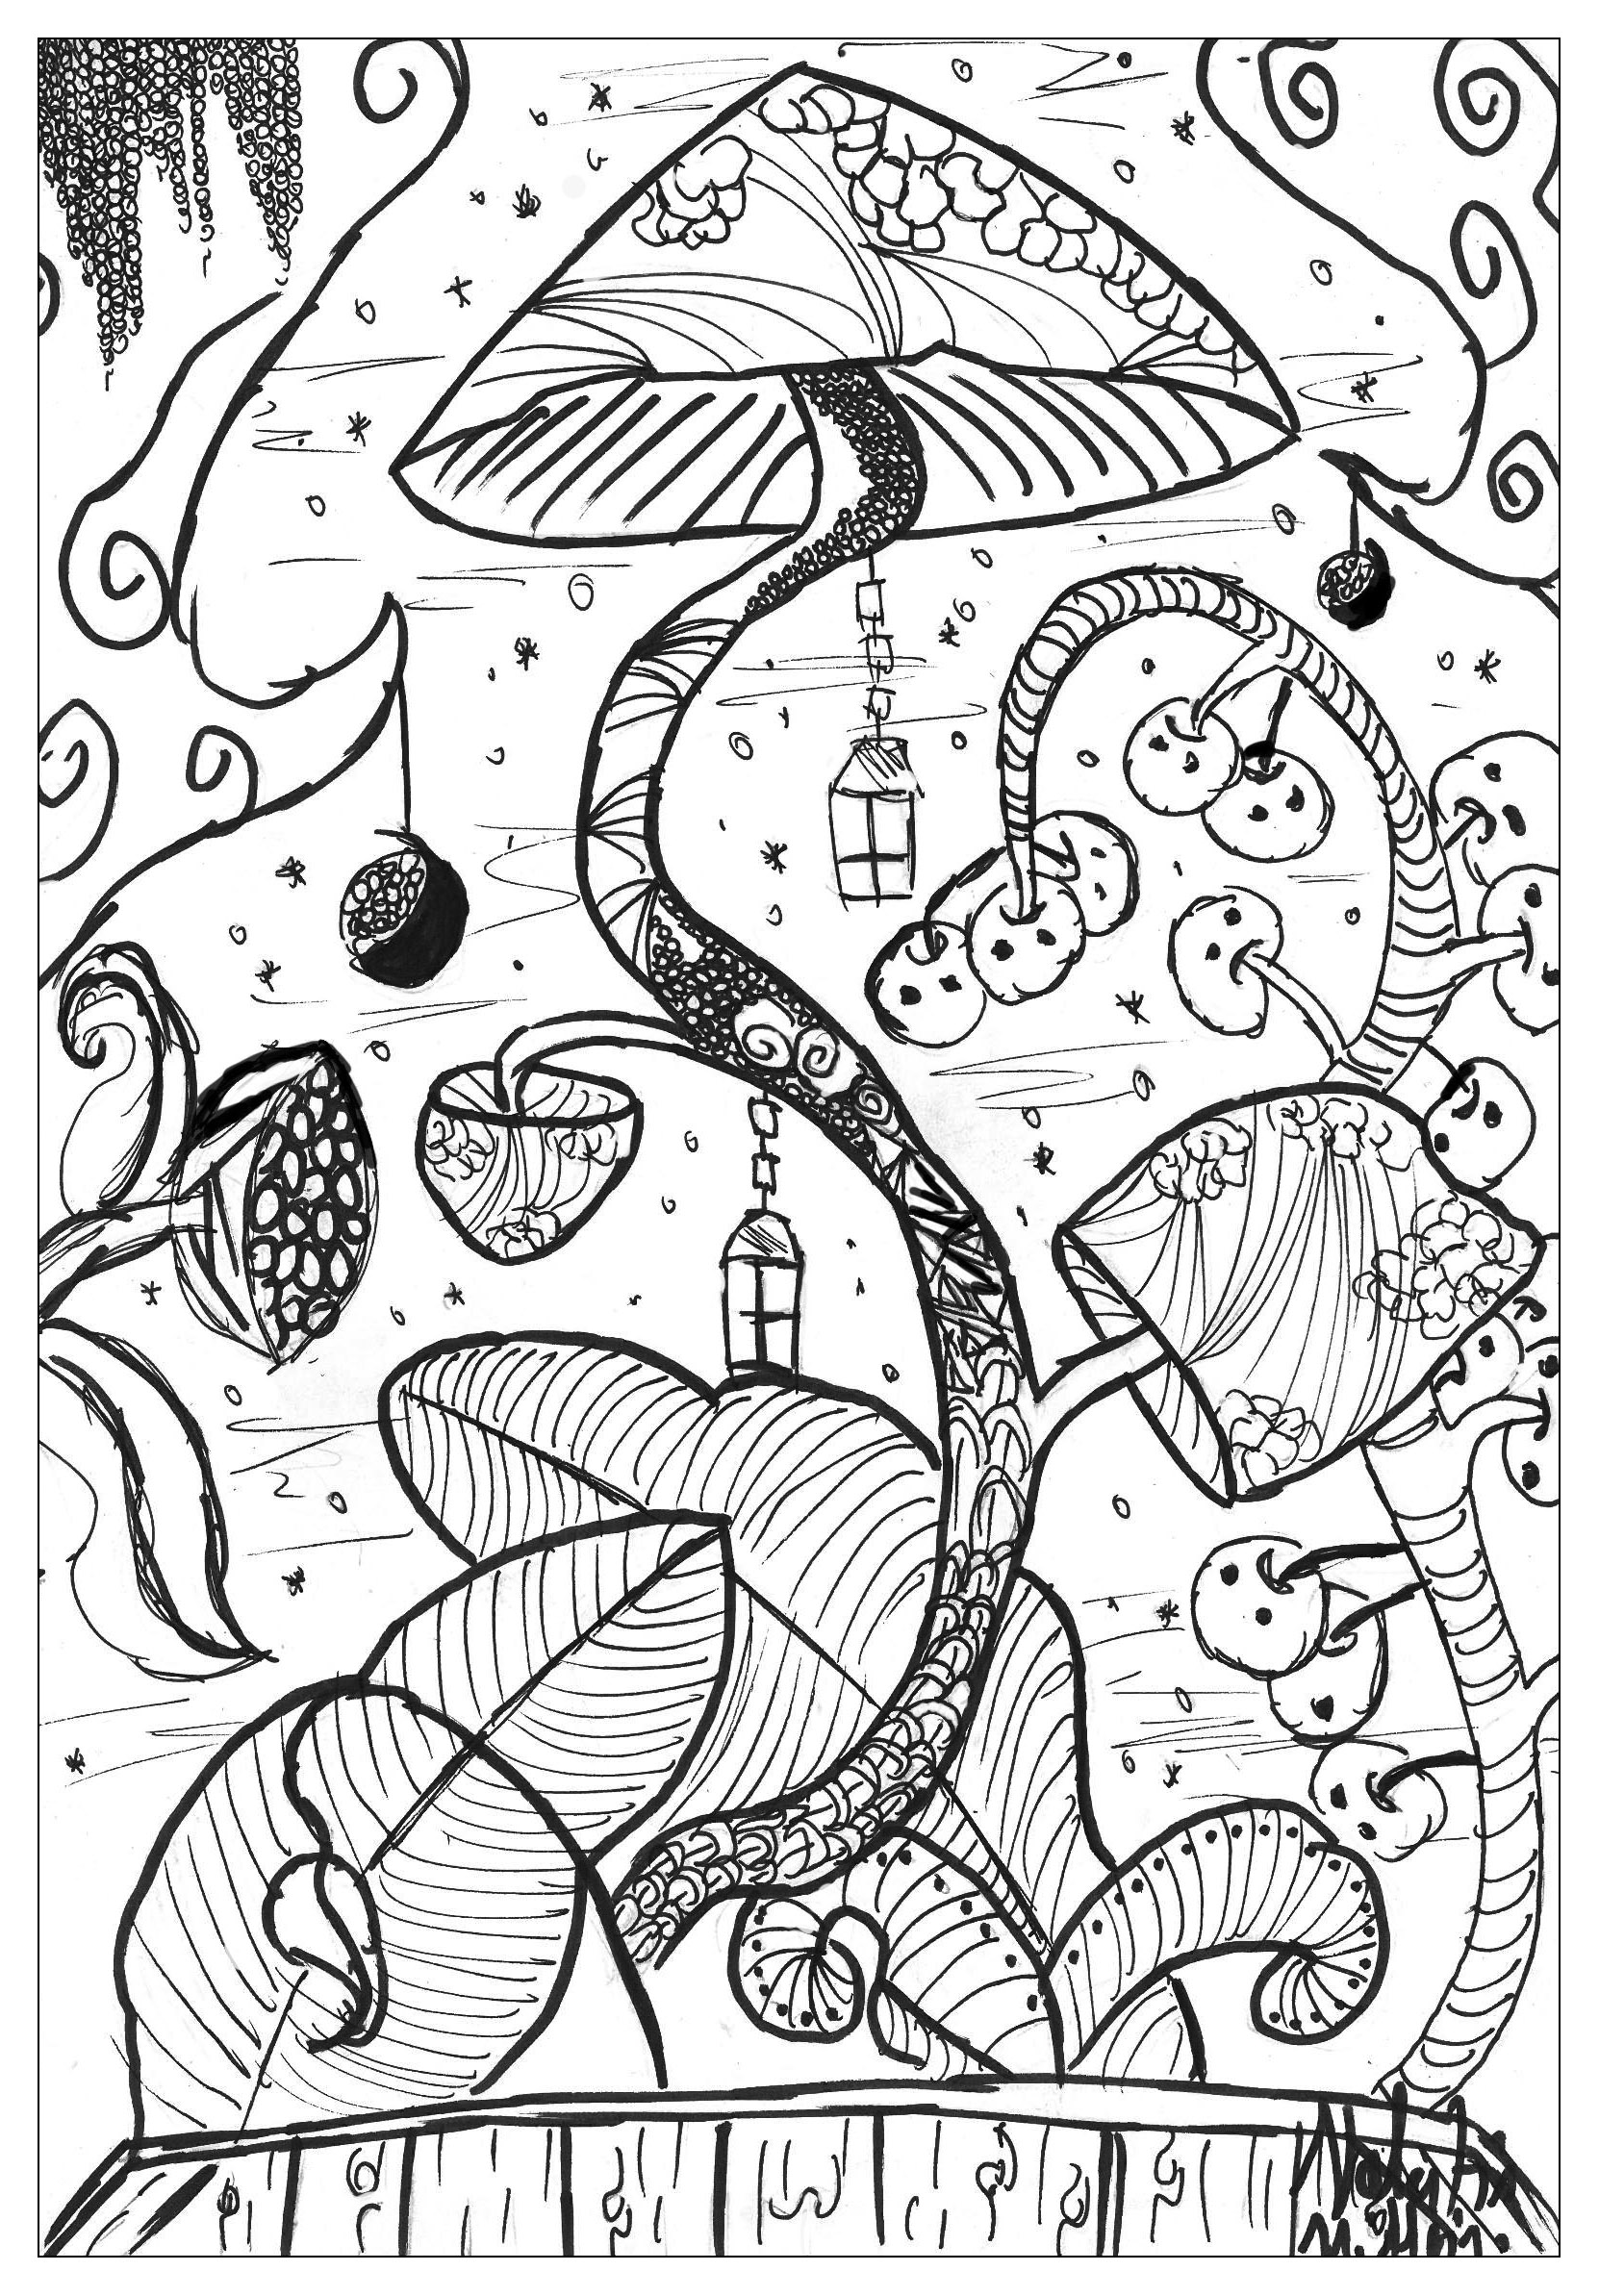 A coloring page with a gigantic mushroom in the forest, Artist : Valentin